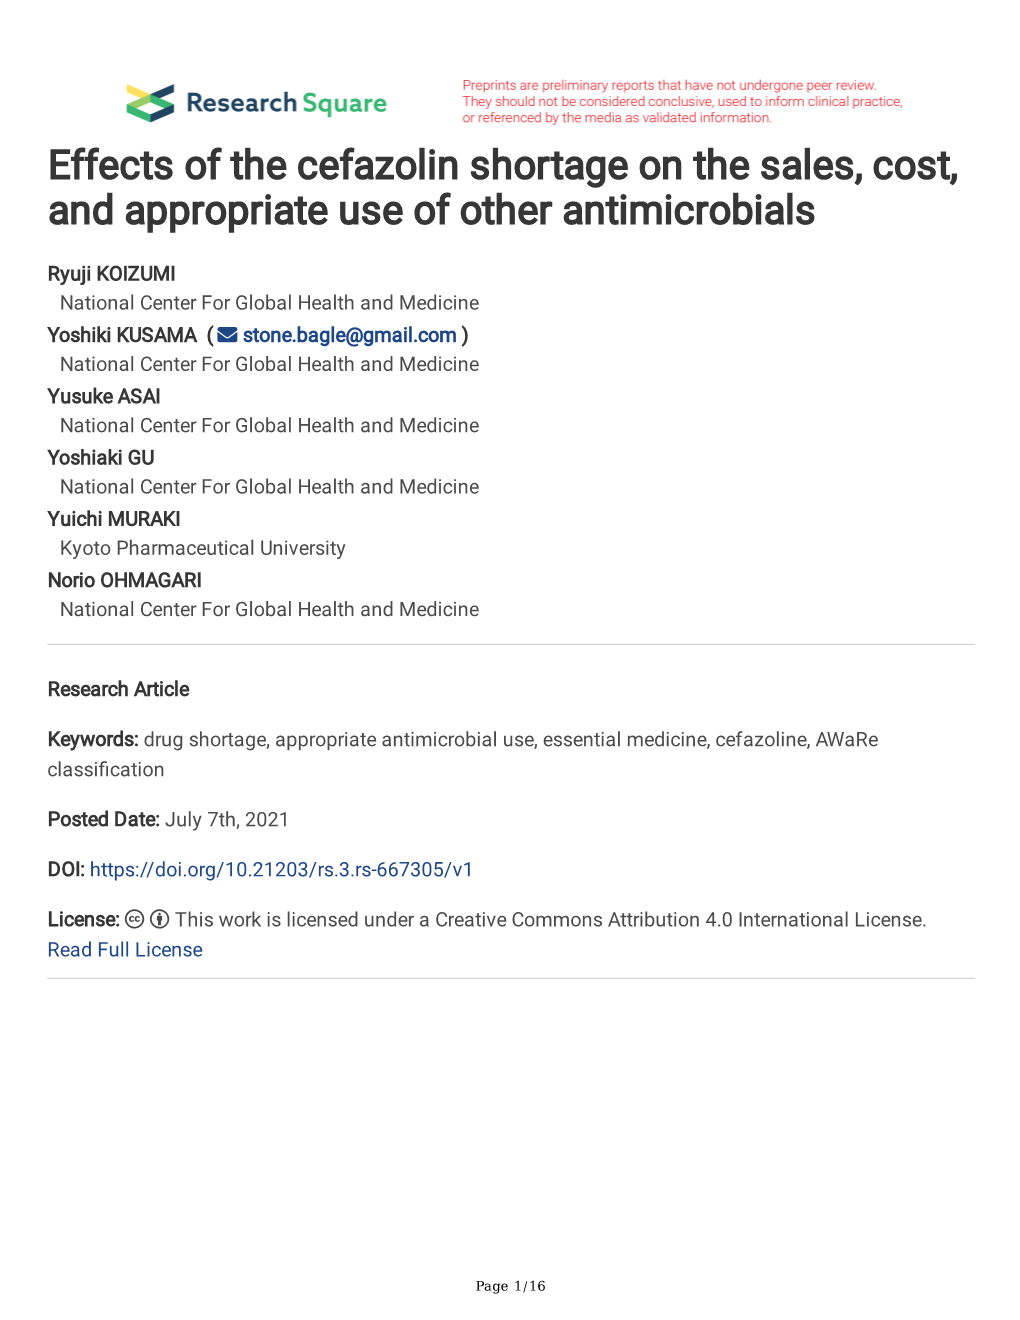 Effects of the Cefazolin Shortage on the Sales, Cost, and Appropriate Use of Other Antimicrobials